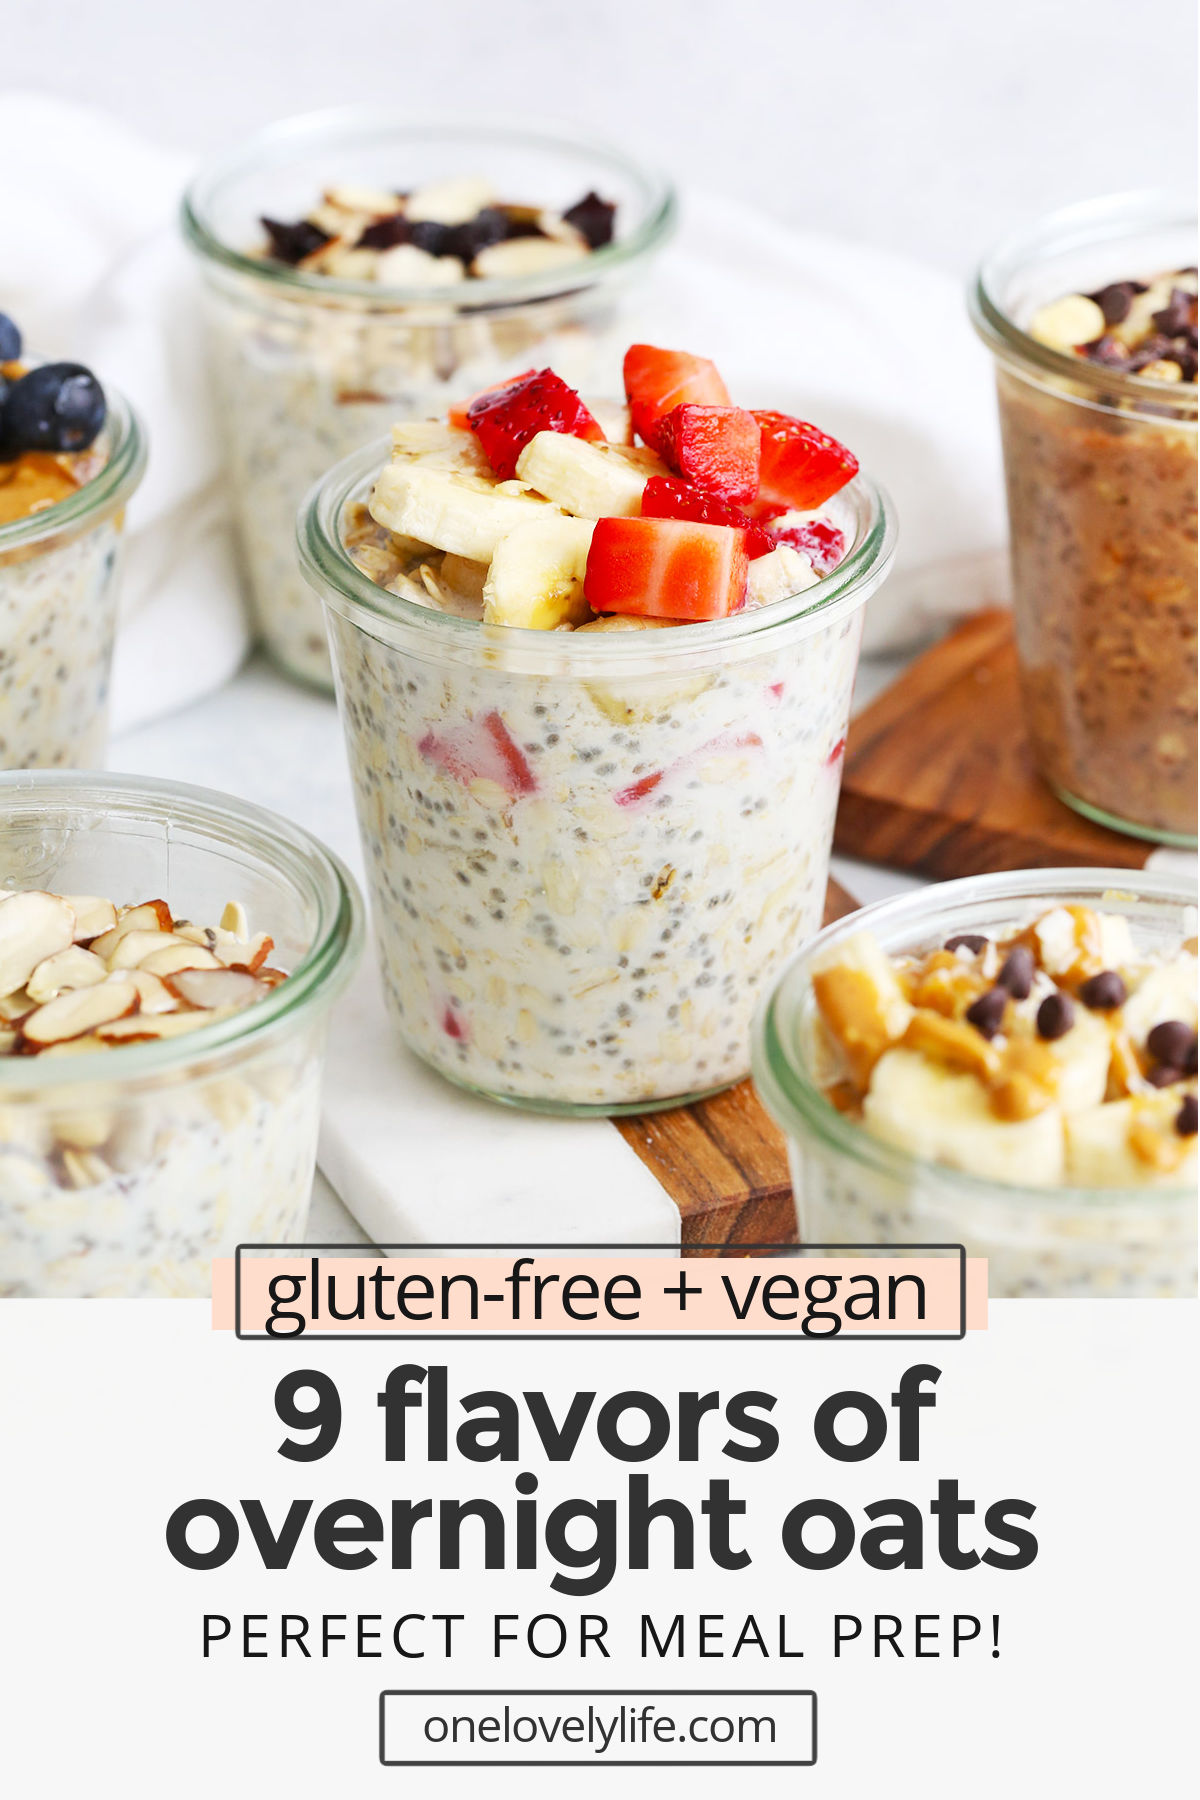 How to Make Overnight Oats + 7 Flavors of Overnight Oats to try! This easy meal prep breakfast is always a hit. (Gluten-free, Vegan) // Meal Prep Breakfast // Overnight Oats Recipe // Healthy Breakfast #glutenfree #overnightoats #oatmeal #dairyfree #healthybreakfast #mealprep #vegan